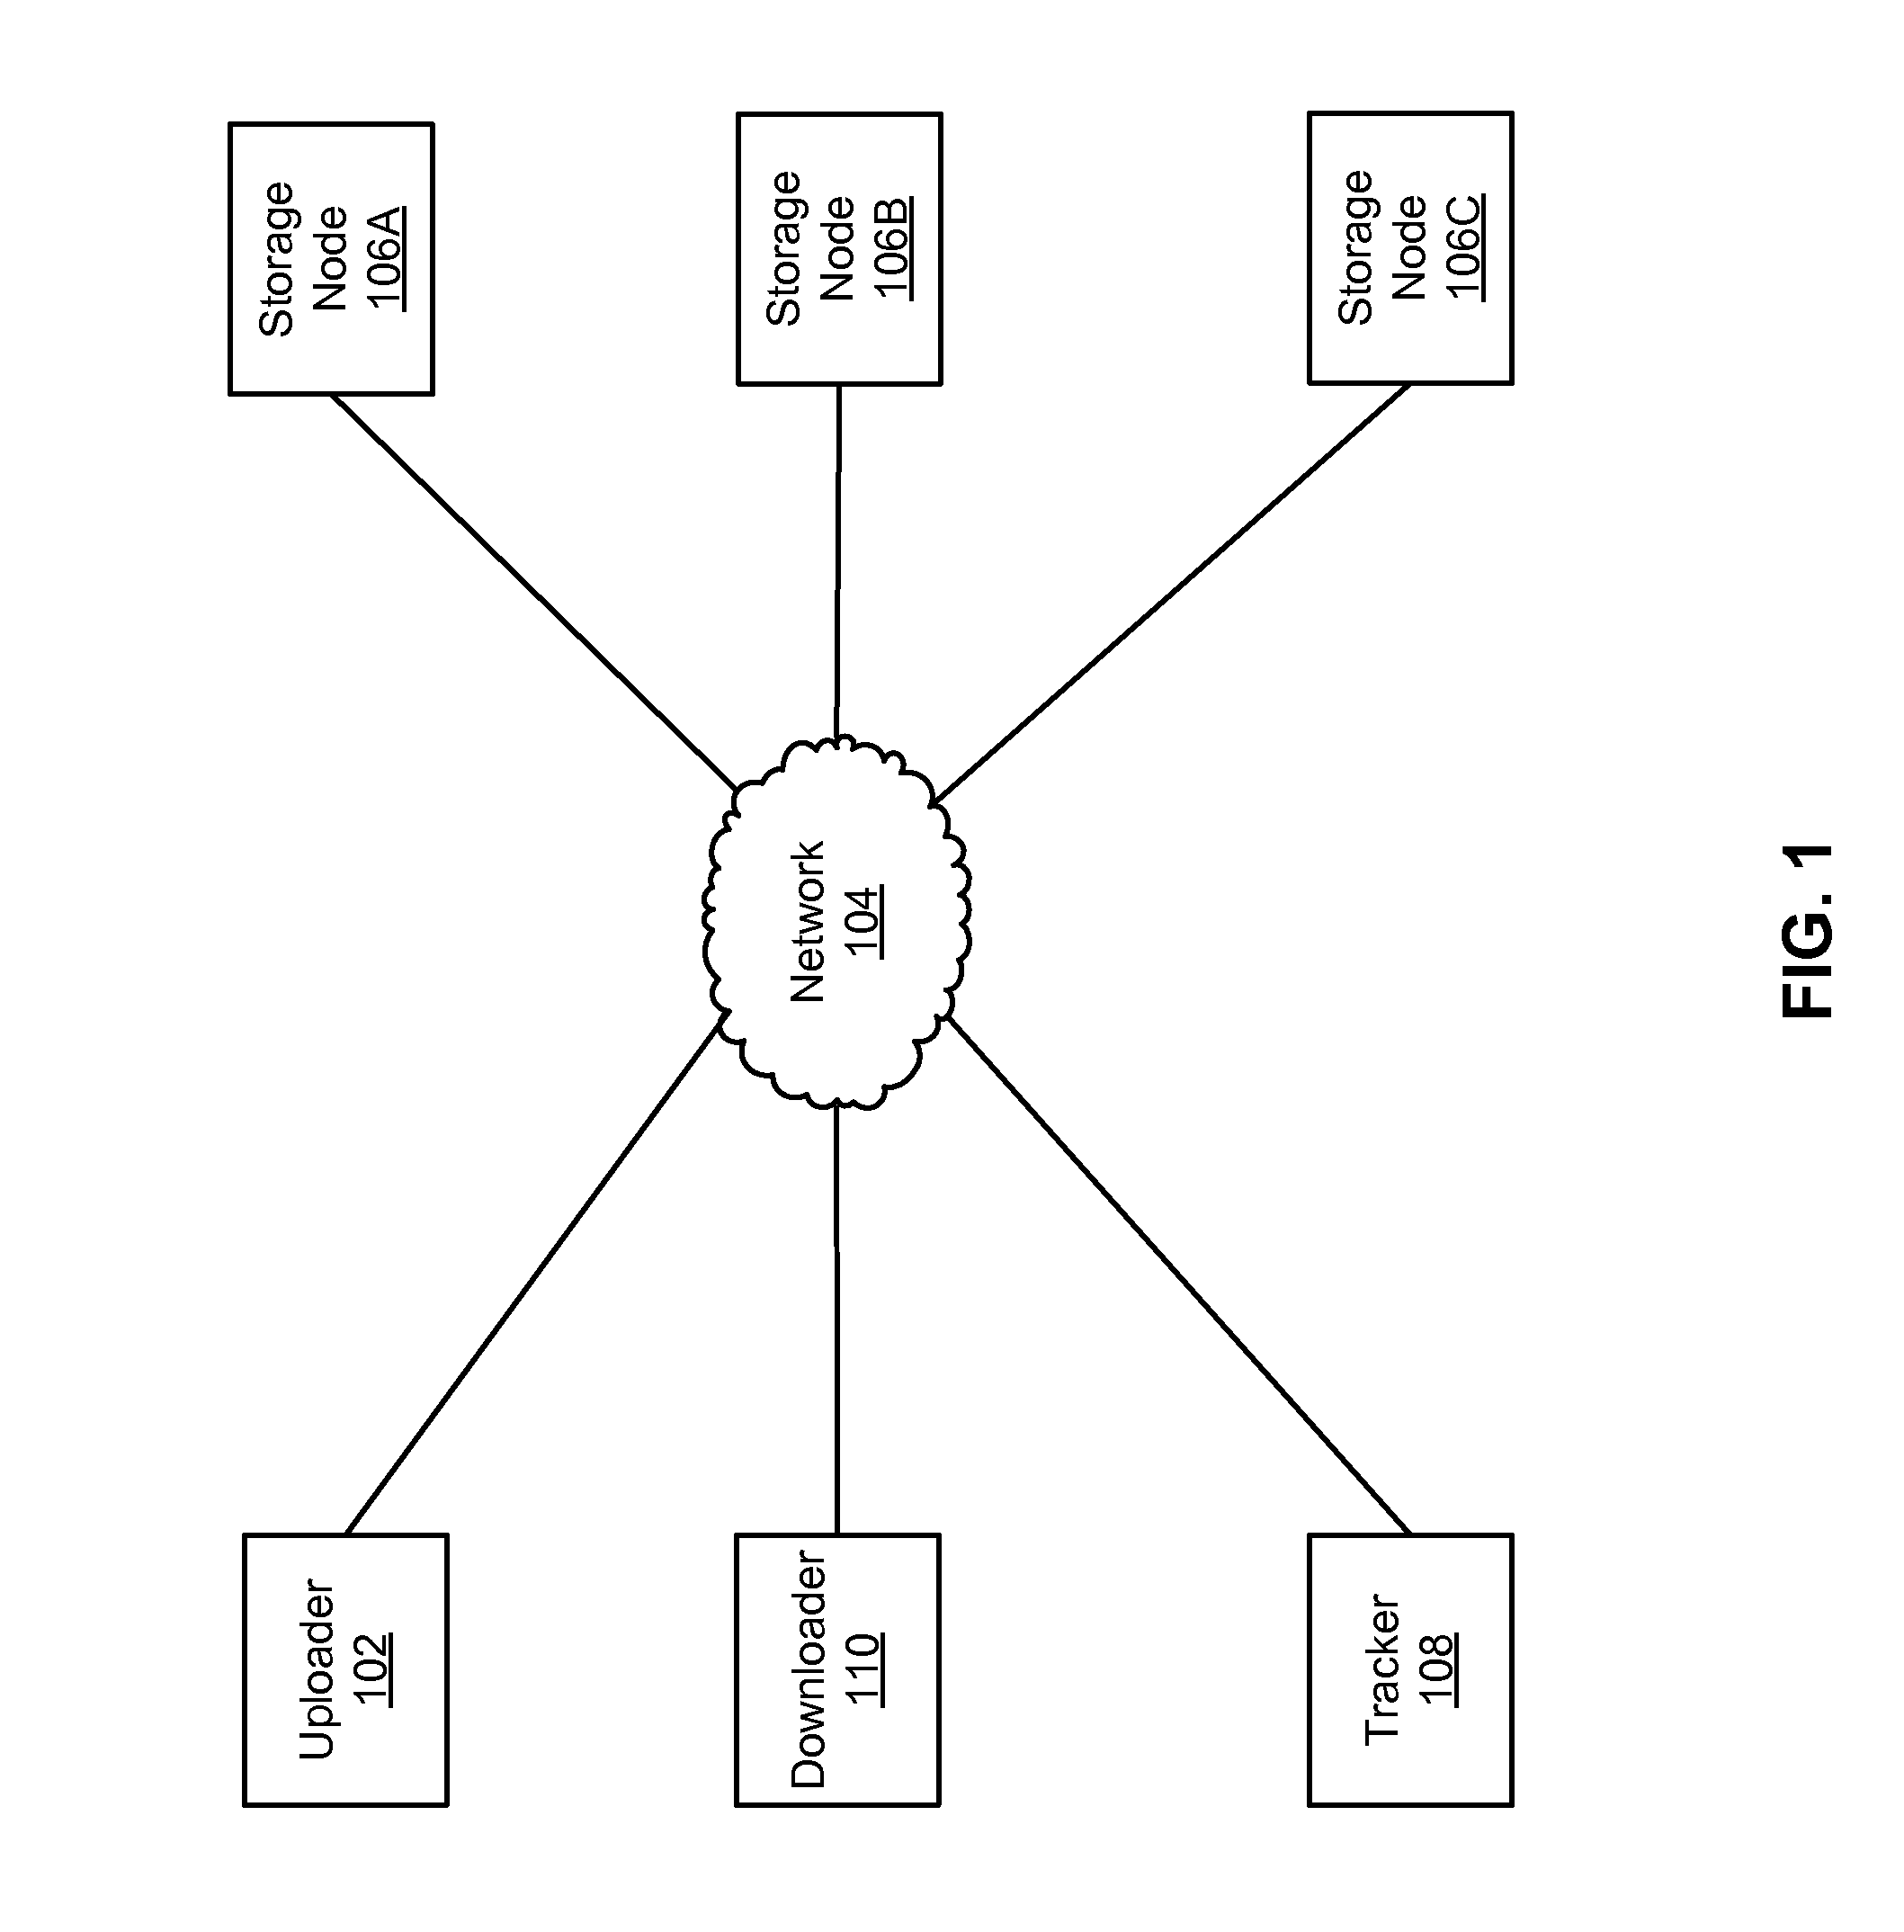 Distributed storage of recoverable data